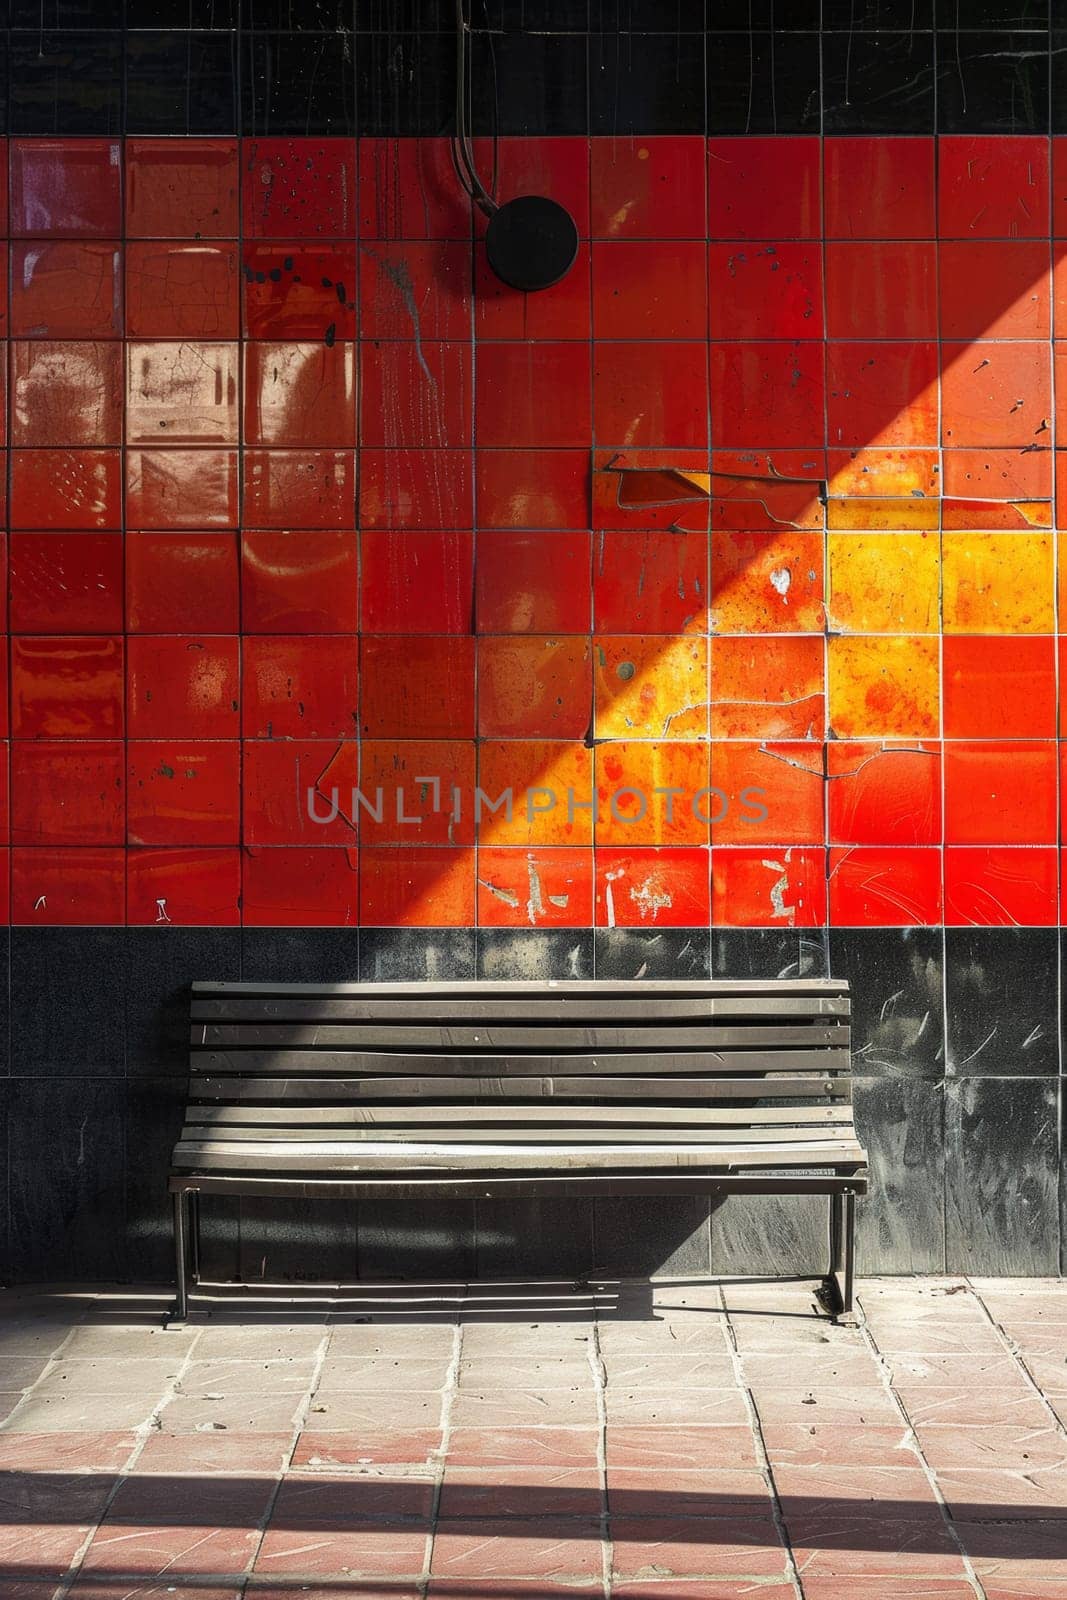 A bench sitting in front of a red and orange wall